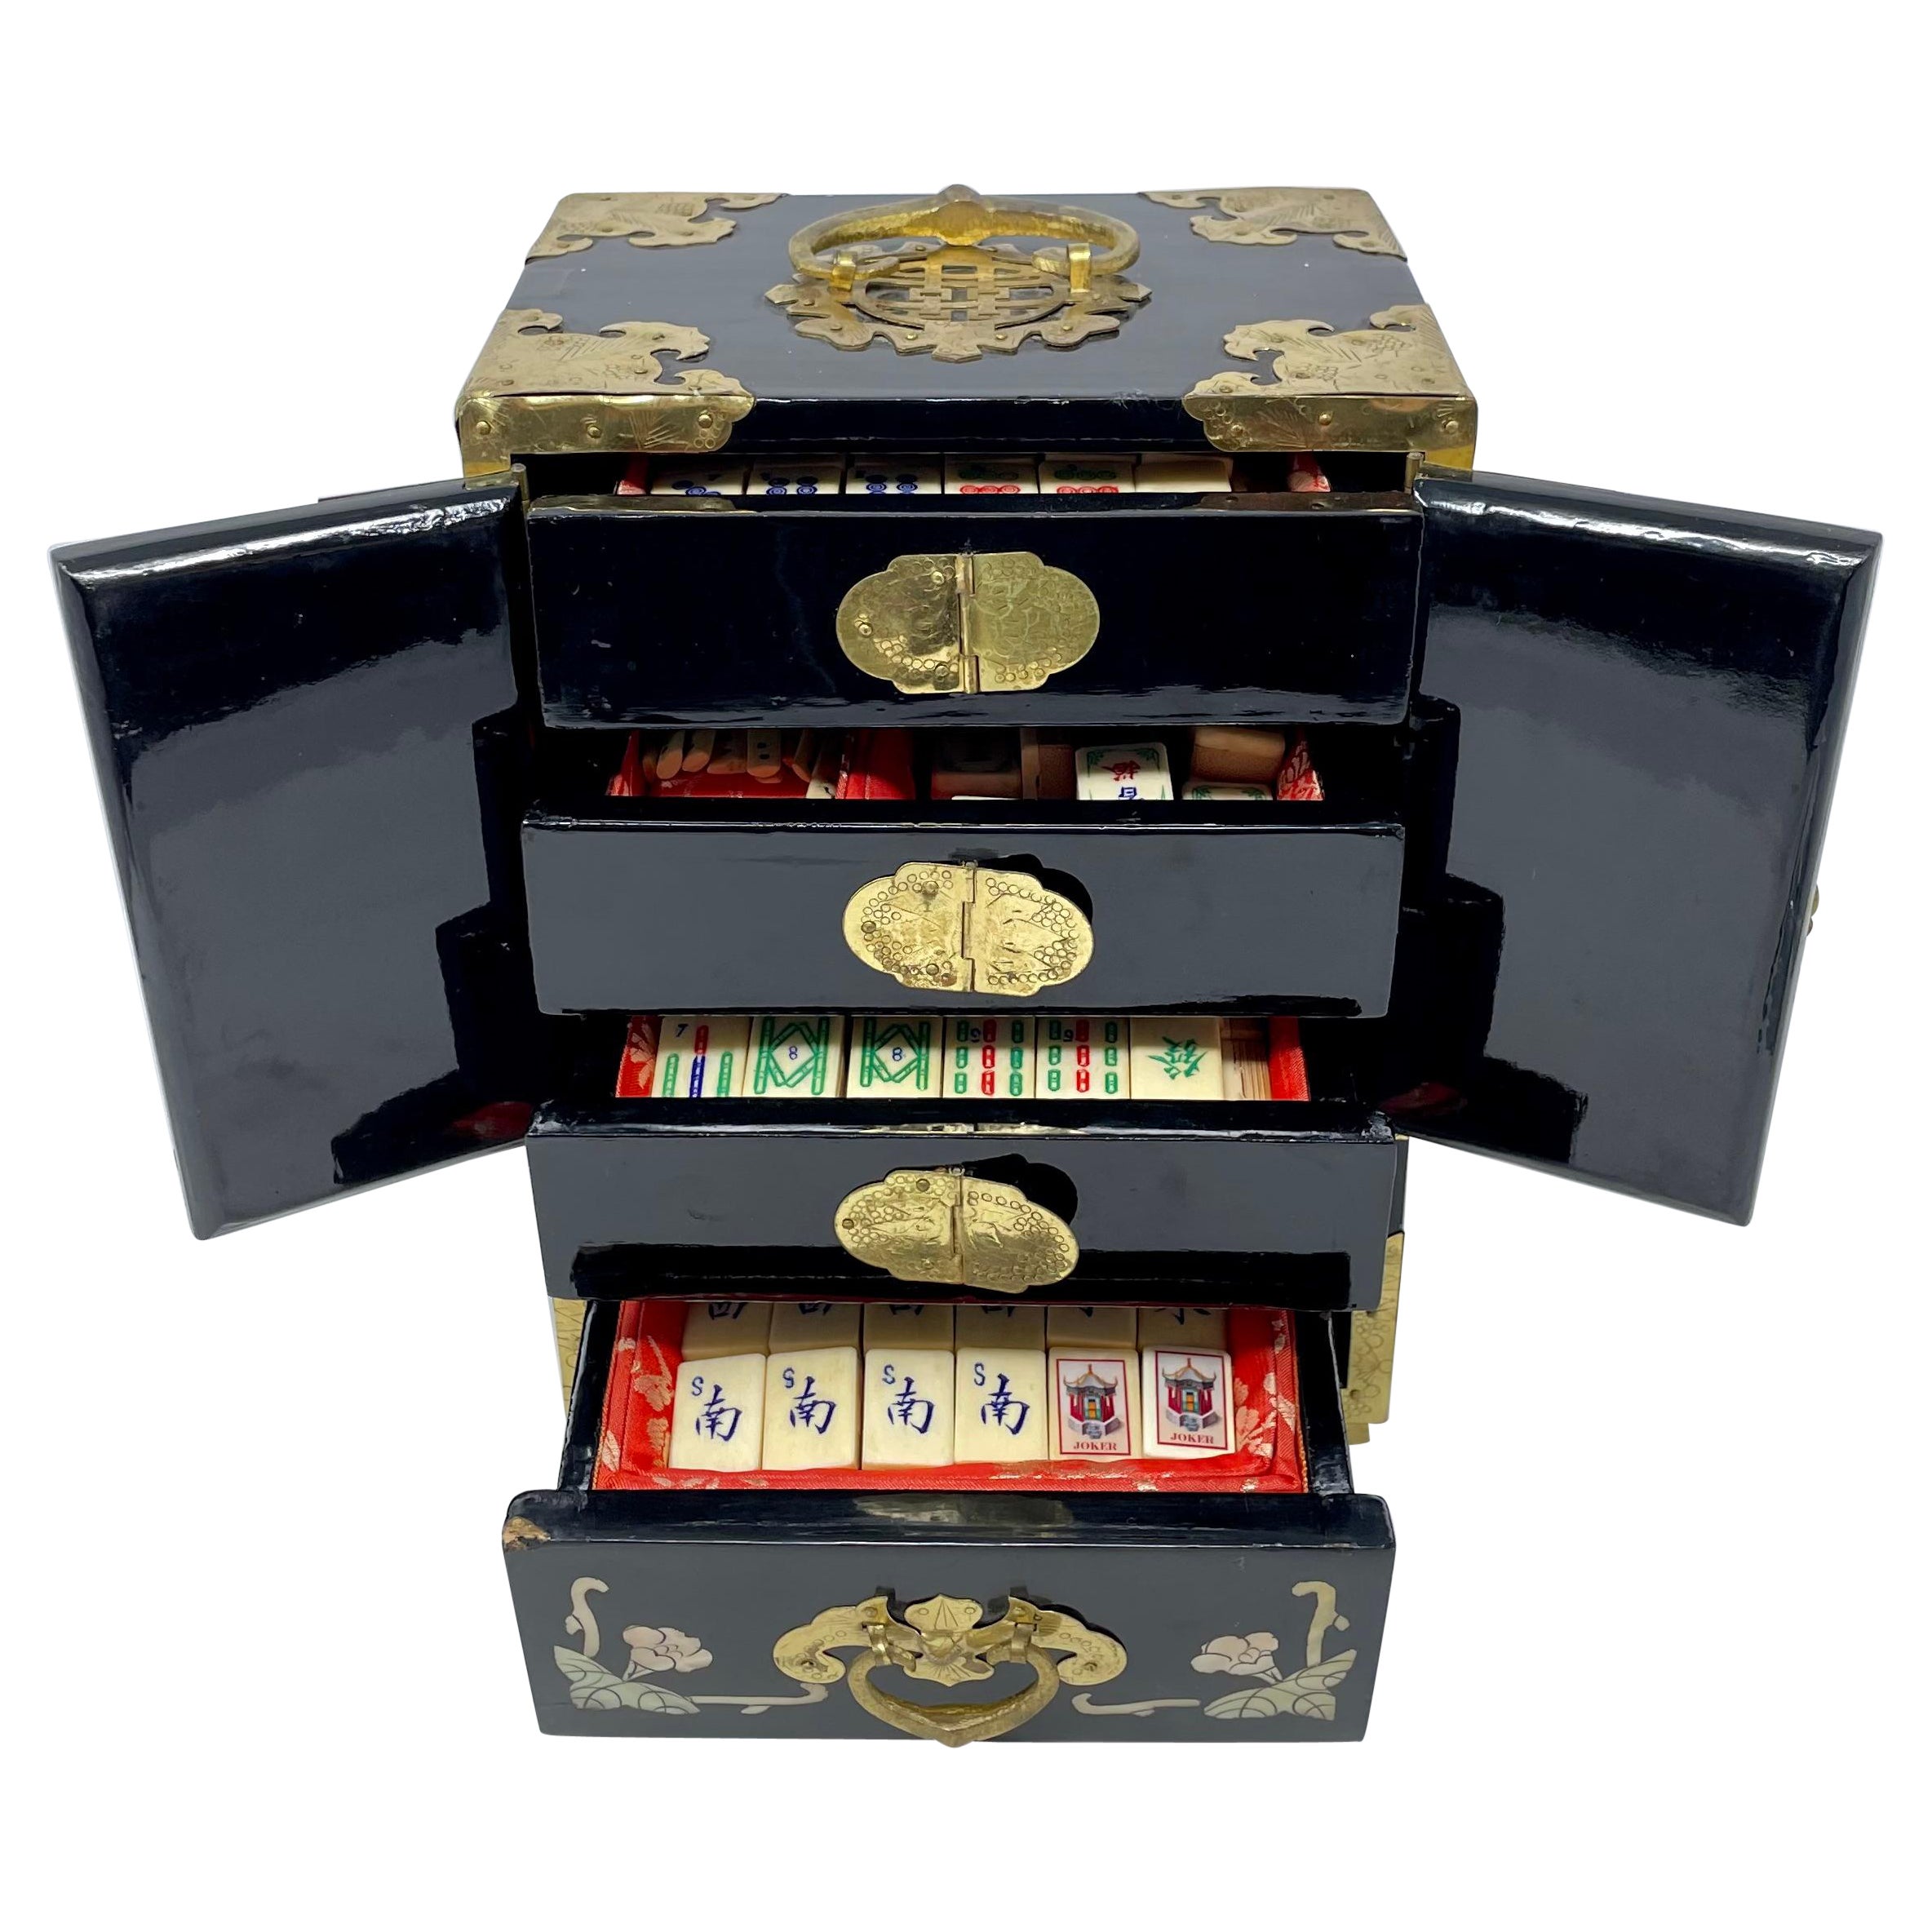 Antique Chinese Lacquer Mahjong Games Box with Brass Mounts, Circa 1910-1920.